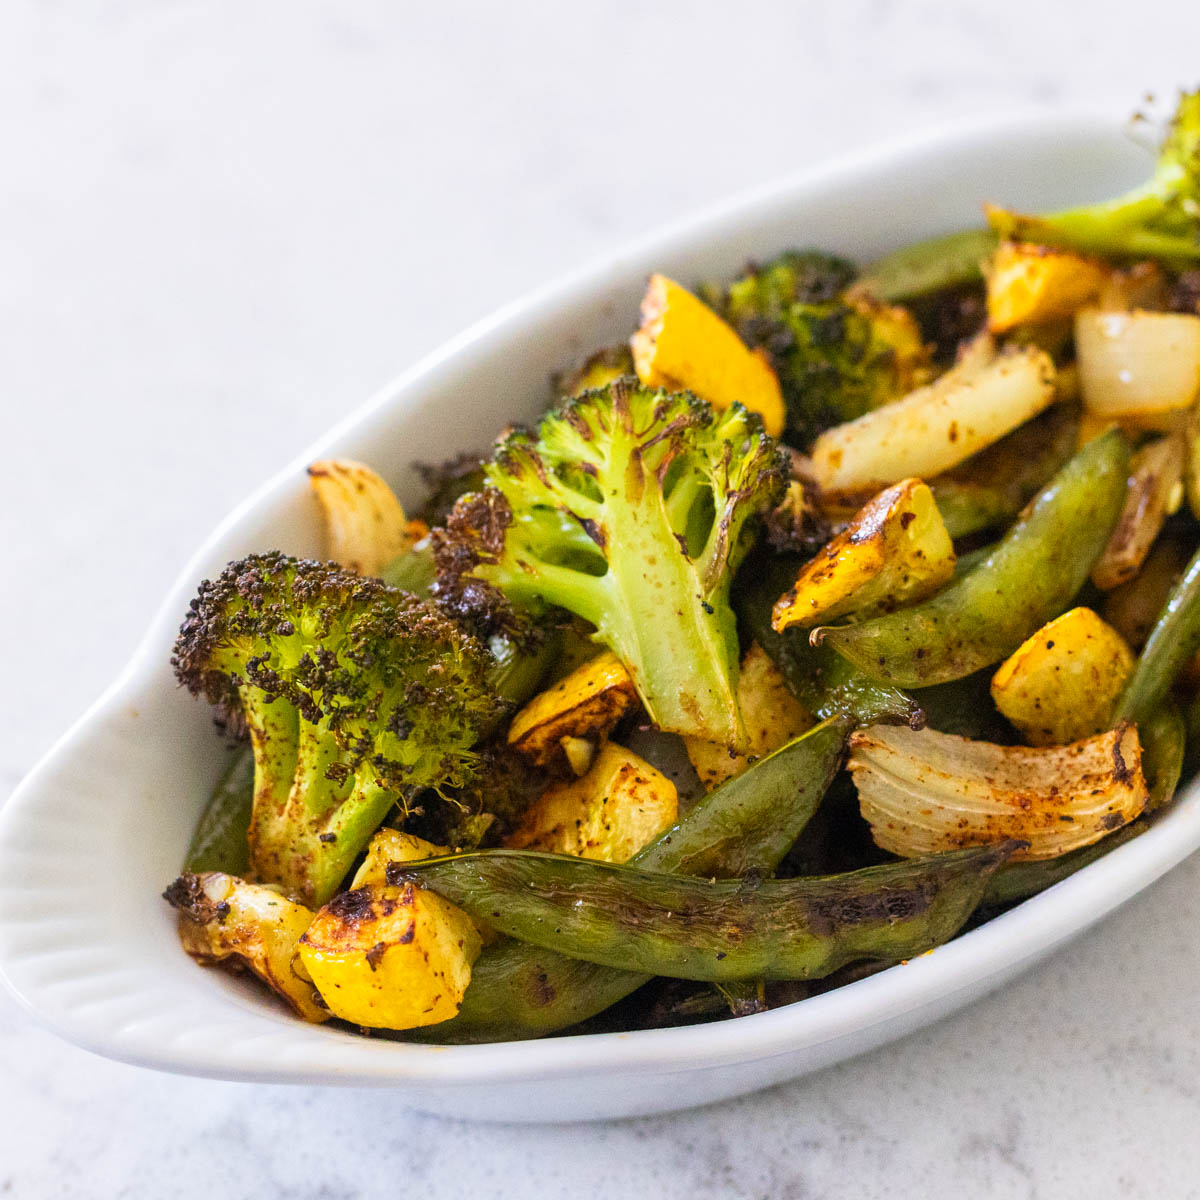 Stir Fry Vegetables in the Oven or Air Fryer - Peanut Blossom